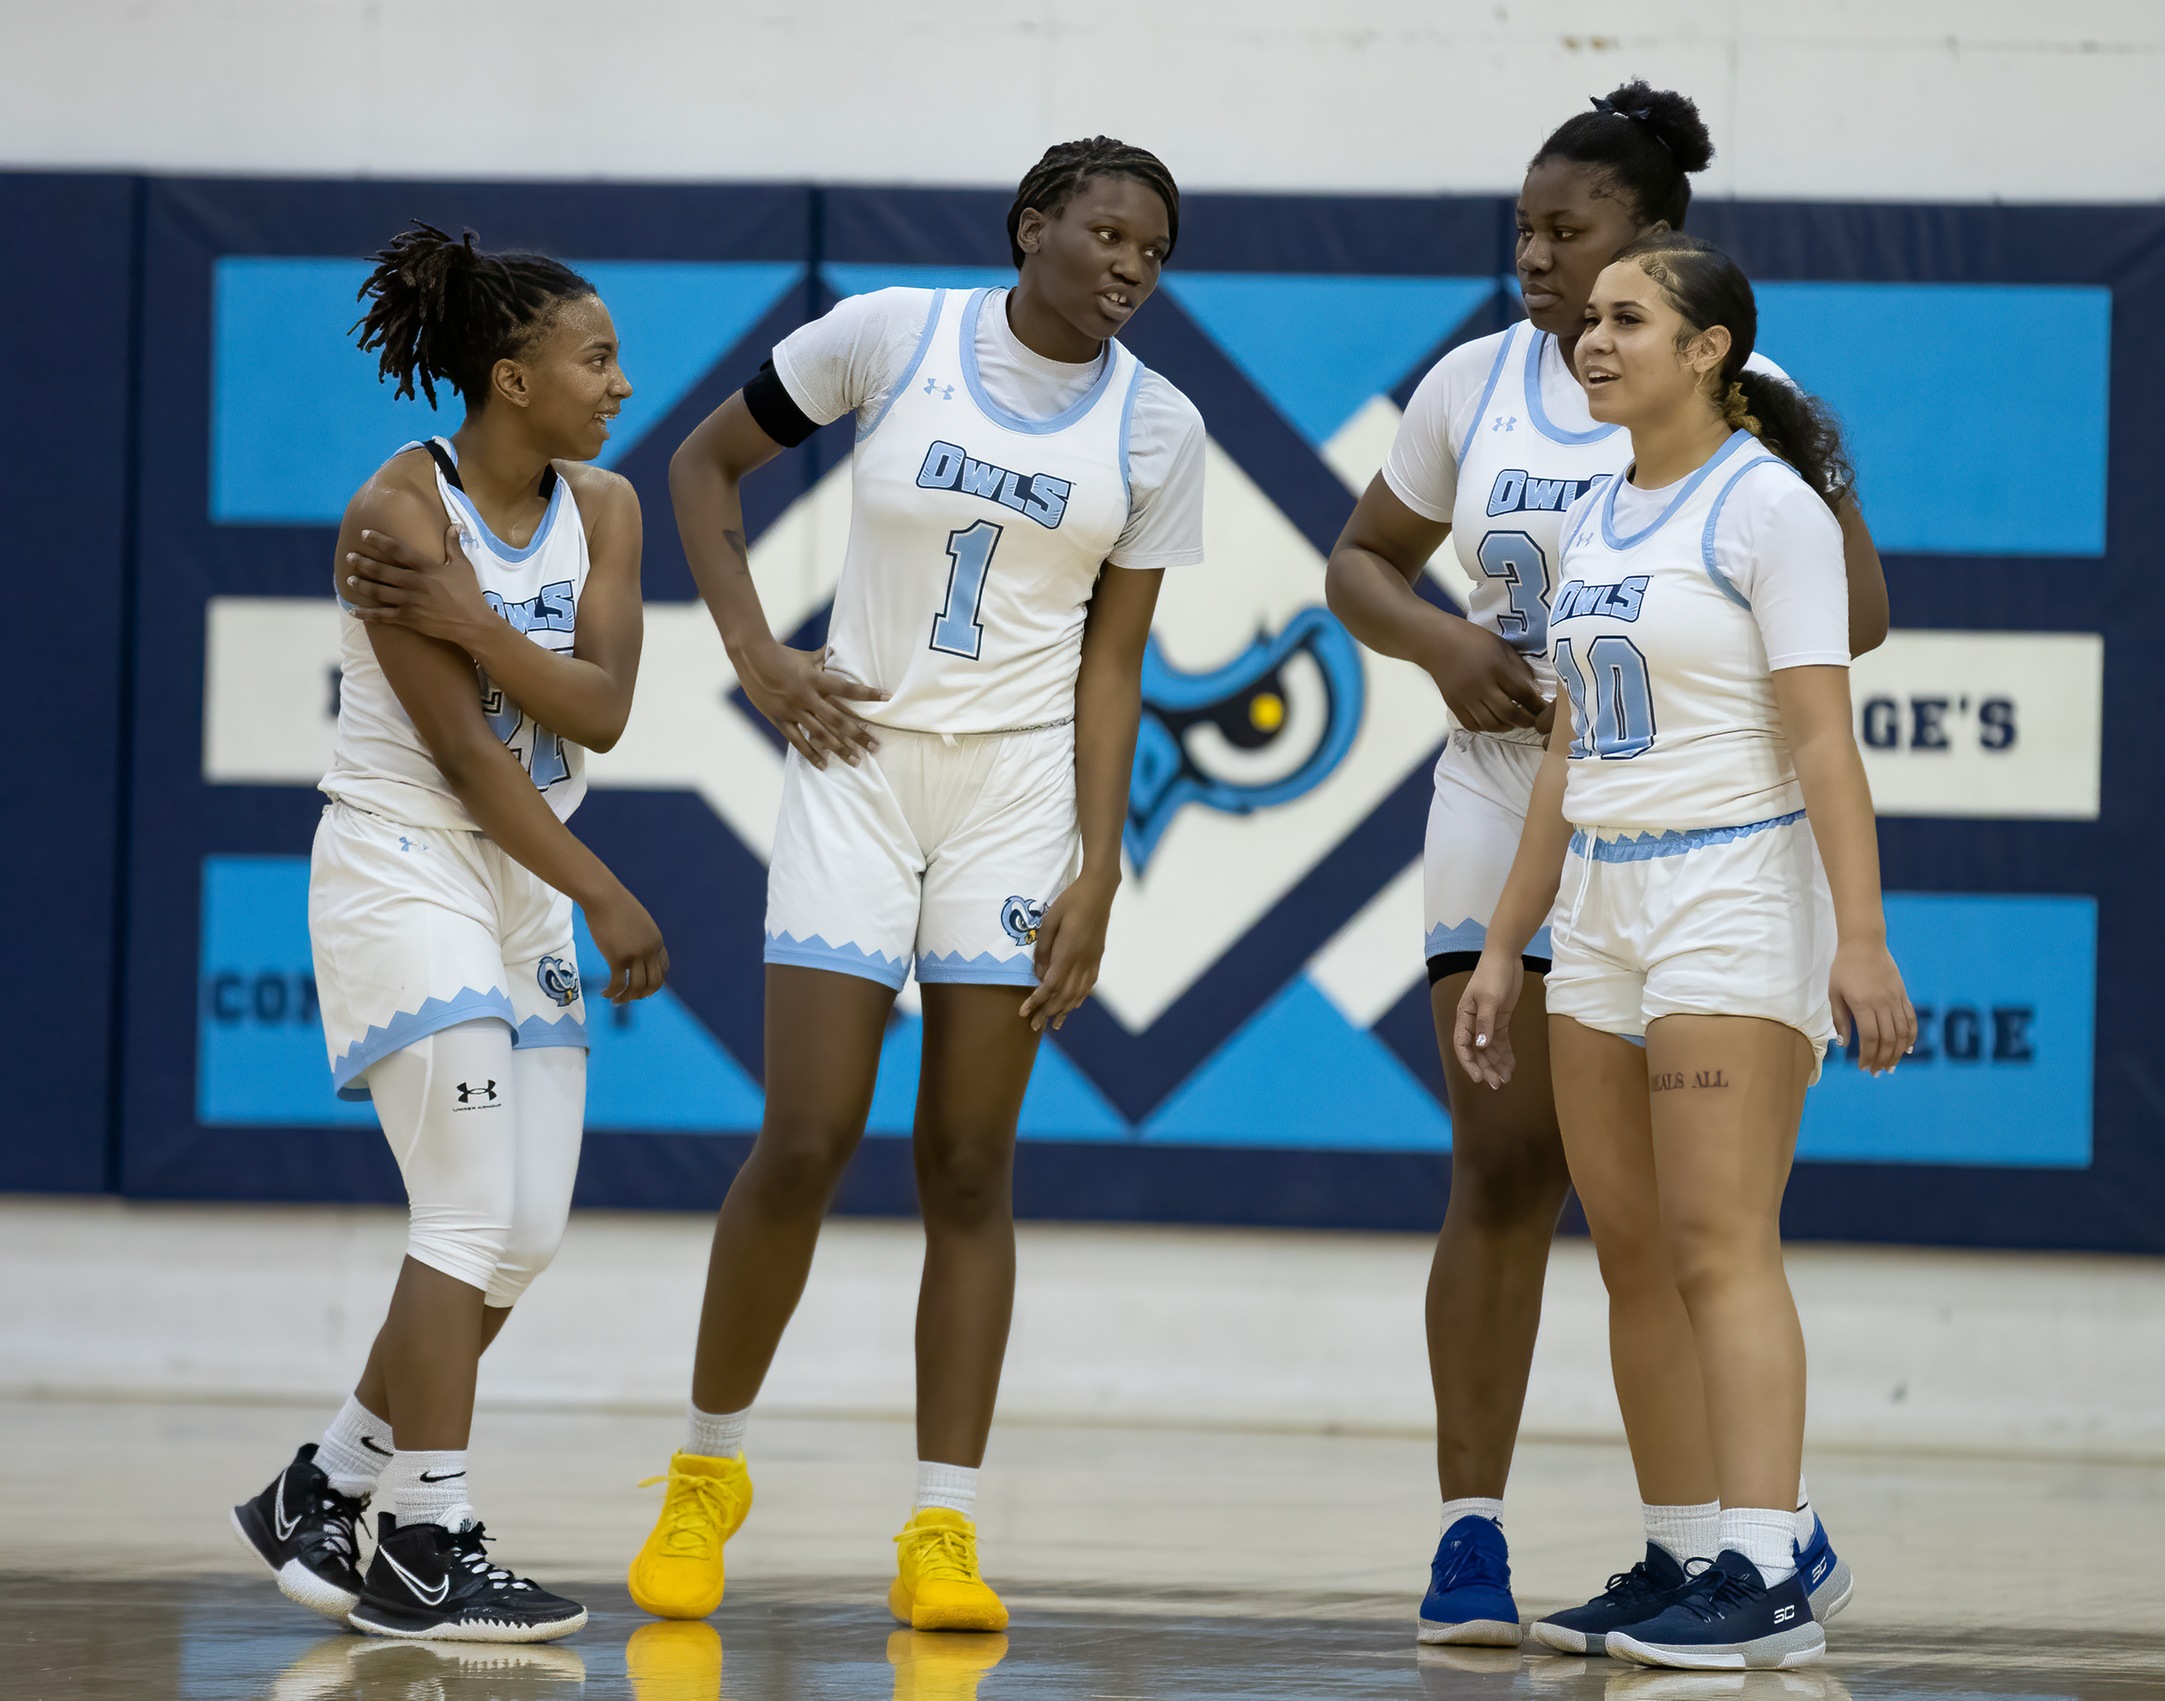 Owls Prepared To Face Northland In First Round Of National Championship